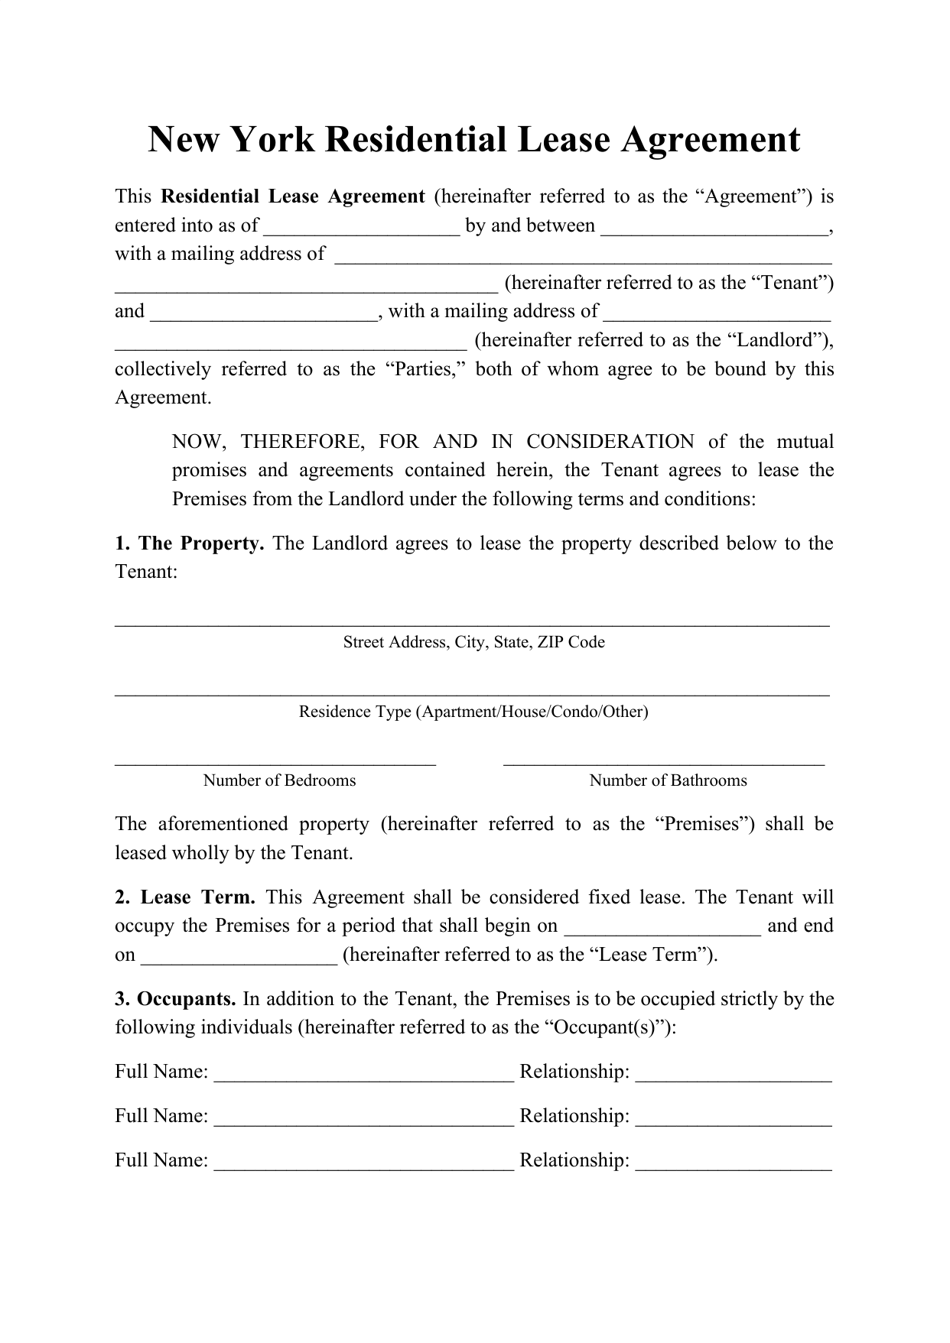 New York Residential Lease Agreement Template Fill Out, Sign Online